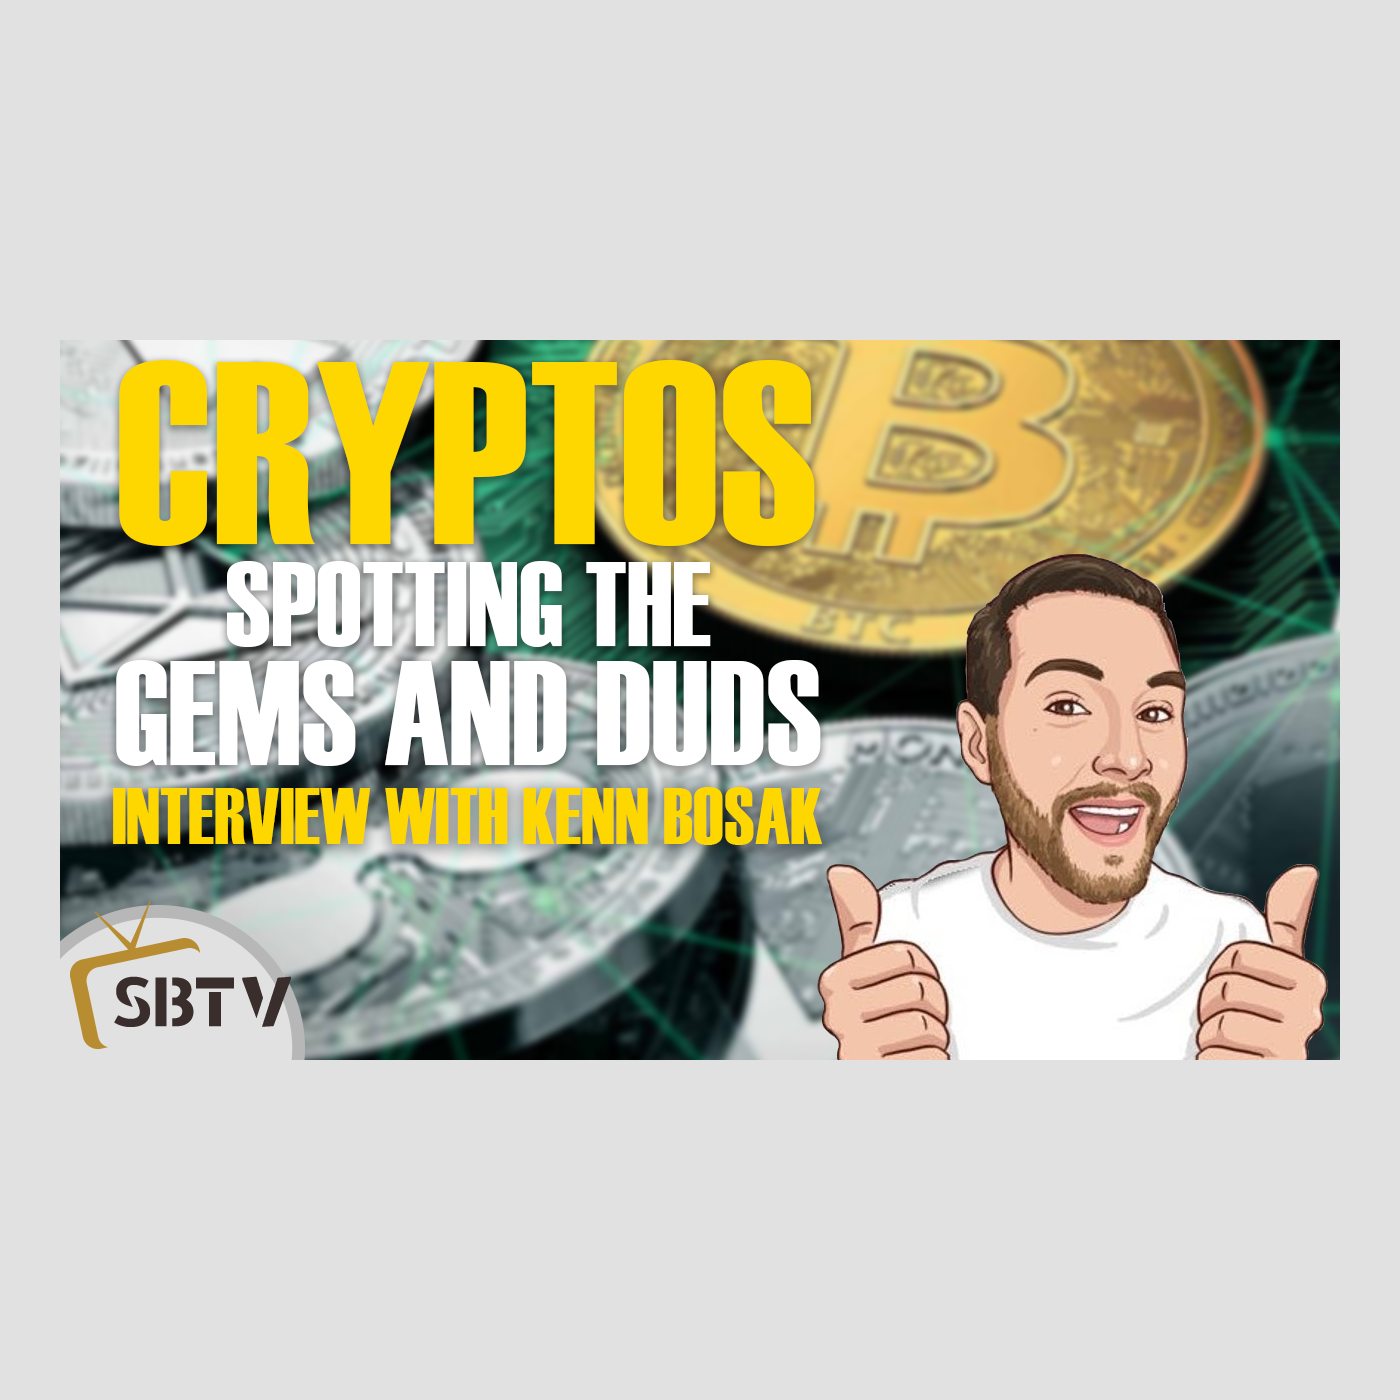 3 Kenn Bosak - Spotting the Gems and Duds in Cryptos and ICOs